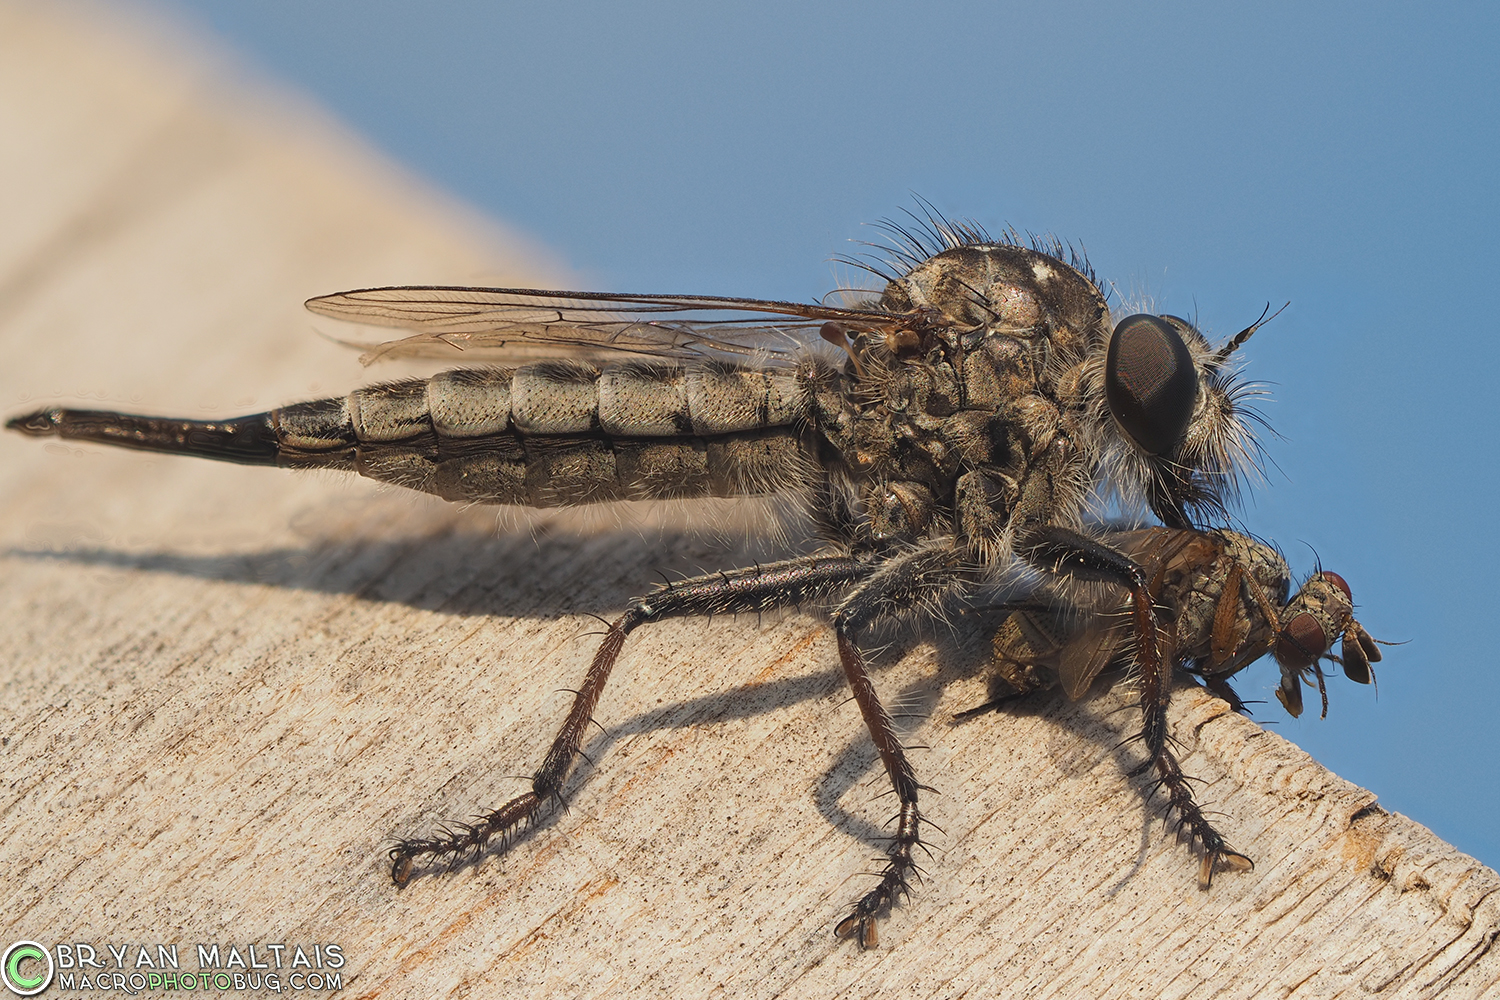 robber fly insect macro photography 29pmax f4 400th iso200